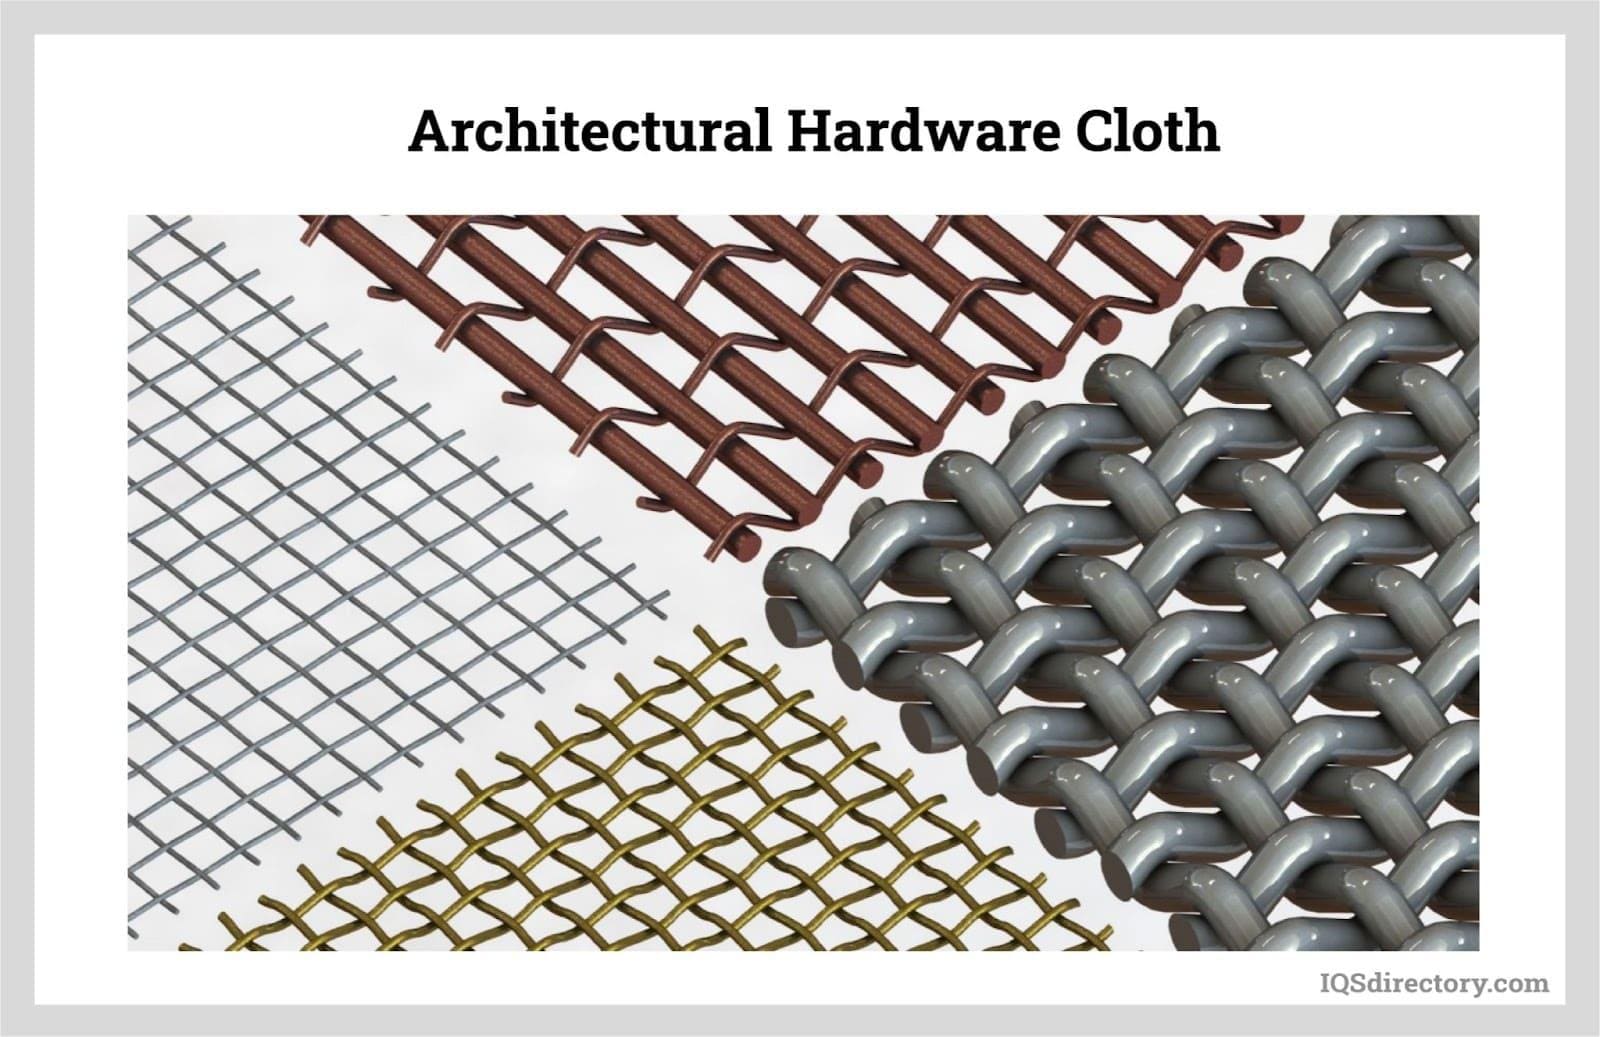 https://www.iqsdirectory.com/articles/wire-mesh/basics-of-wire-mesh/architectural-hardware-cloth.jpg